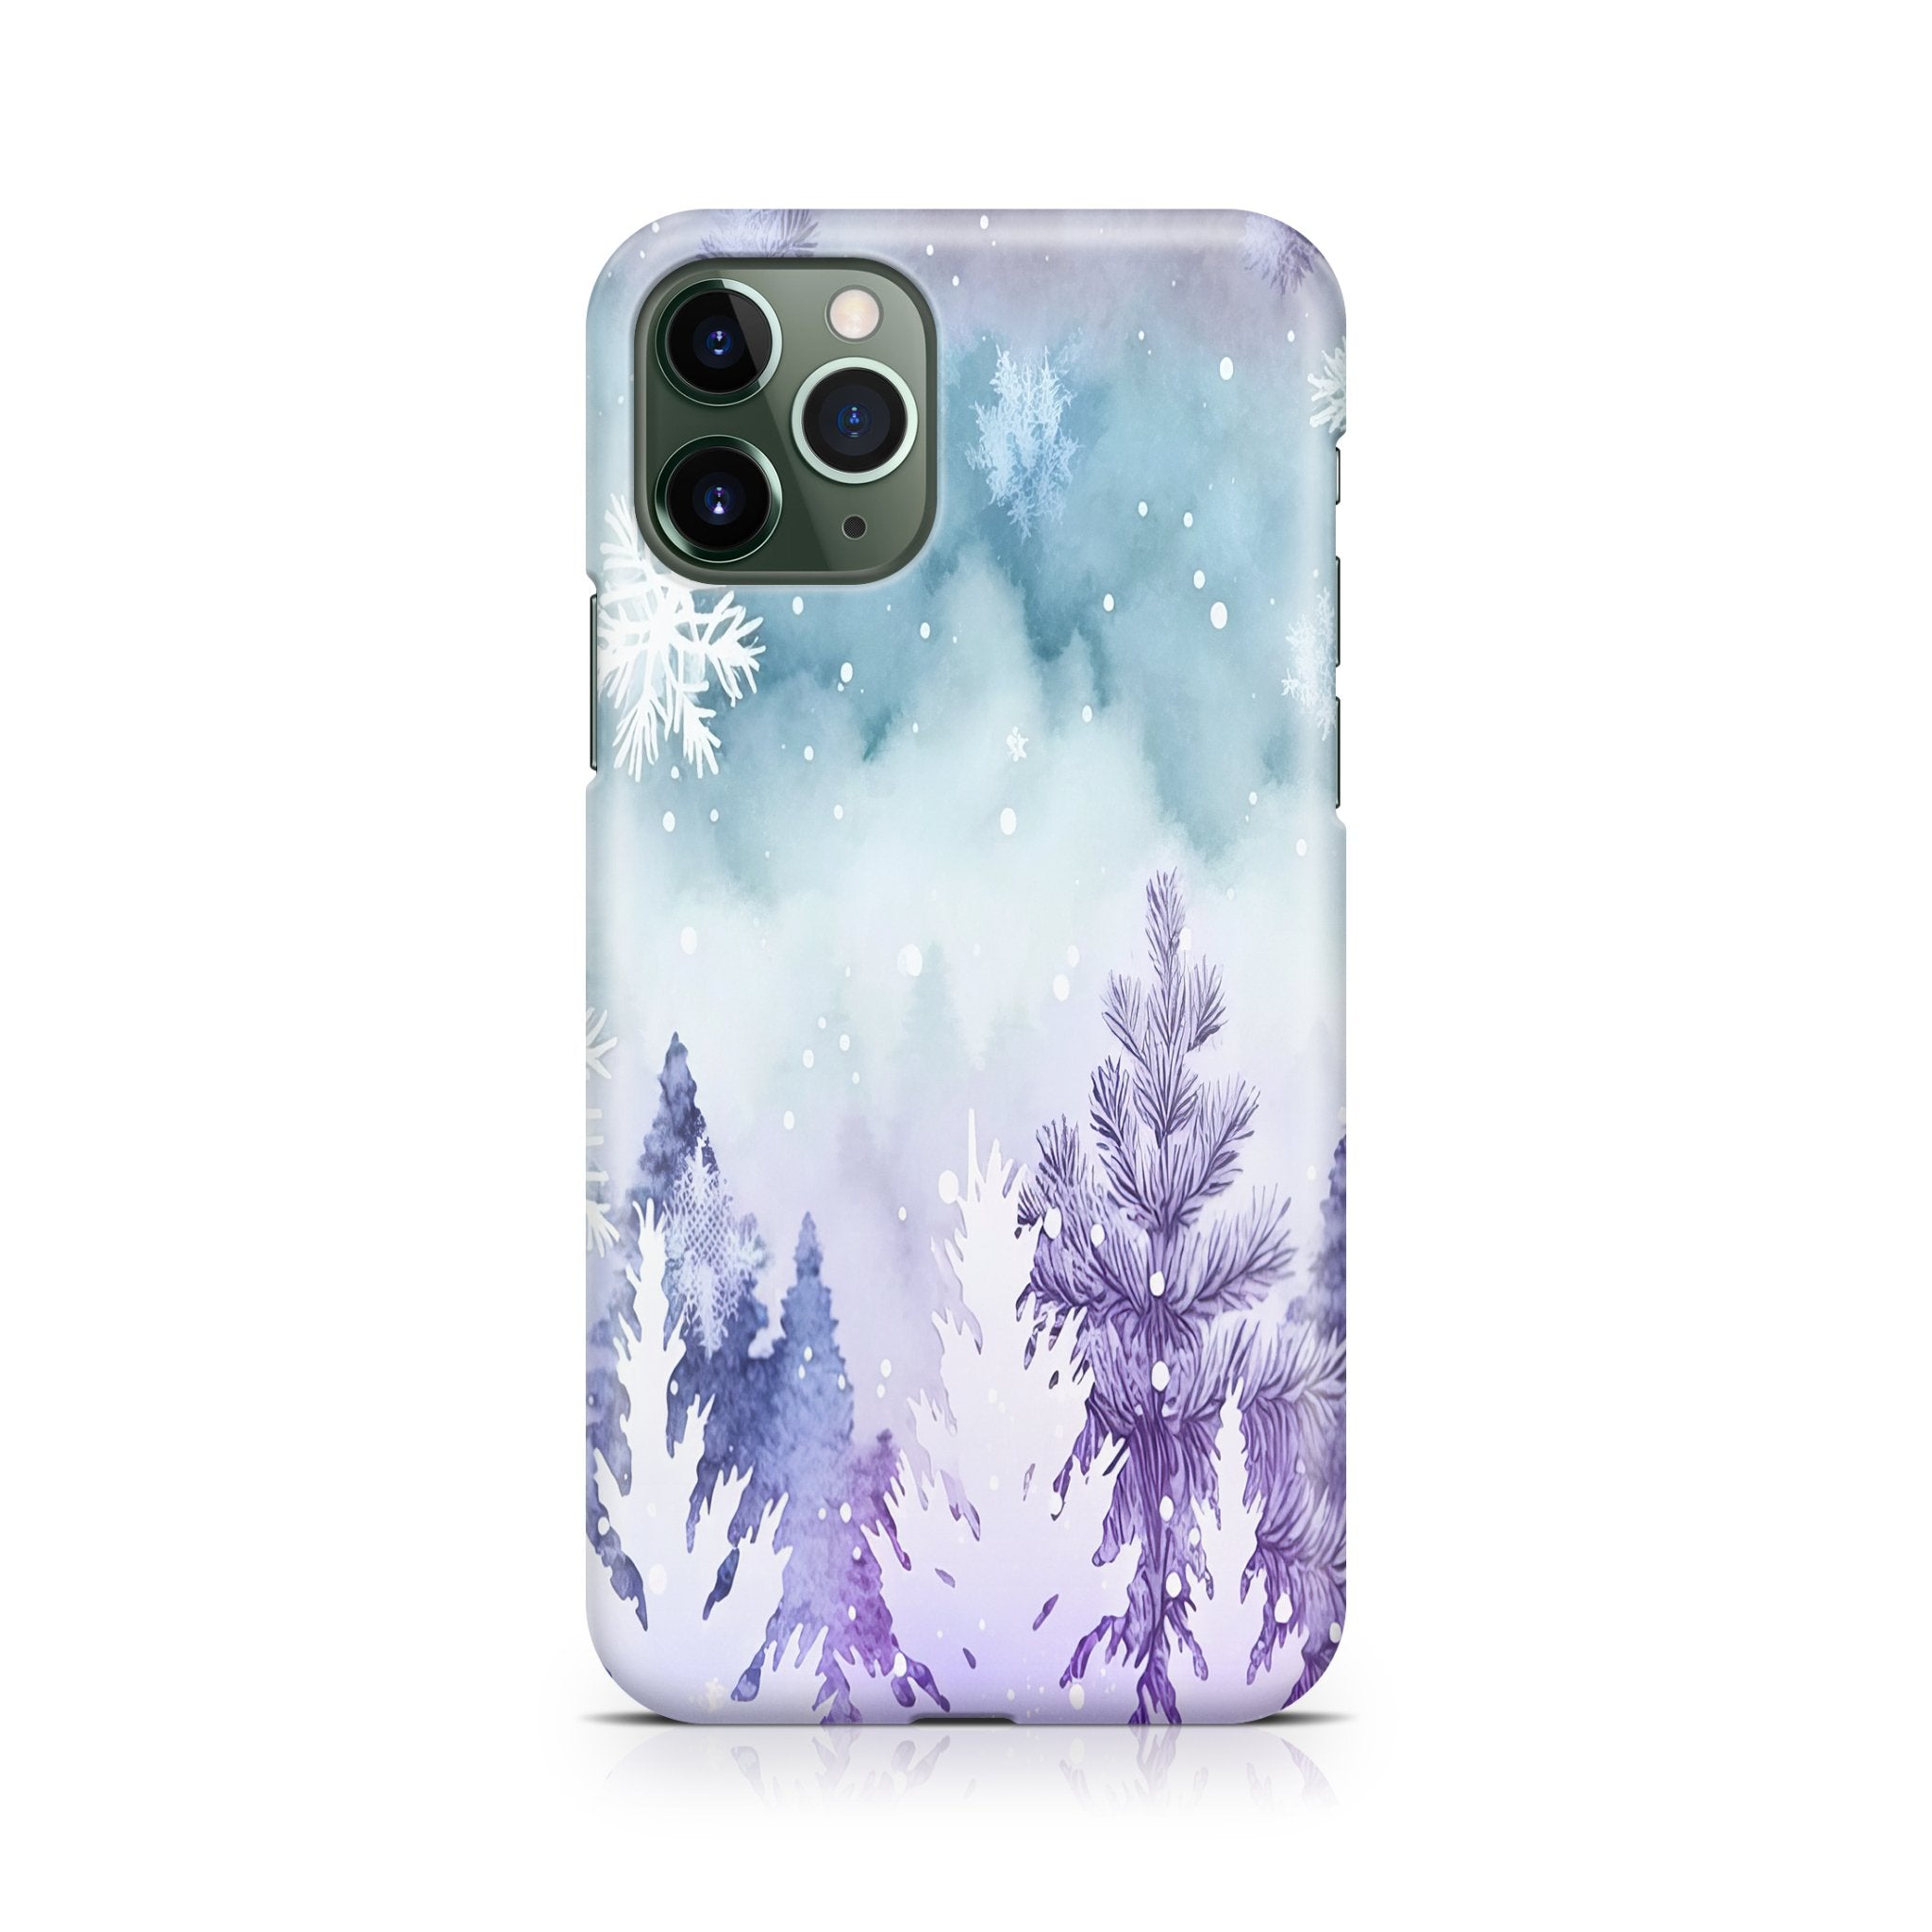 Quiet Snowfall - iPhone phone case designs by CaseSwagger